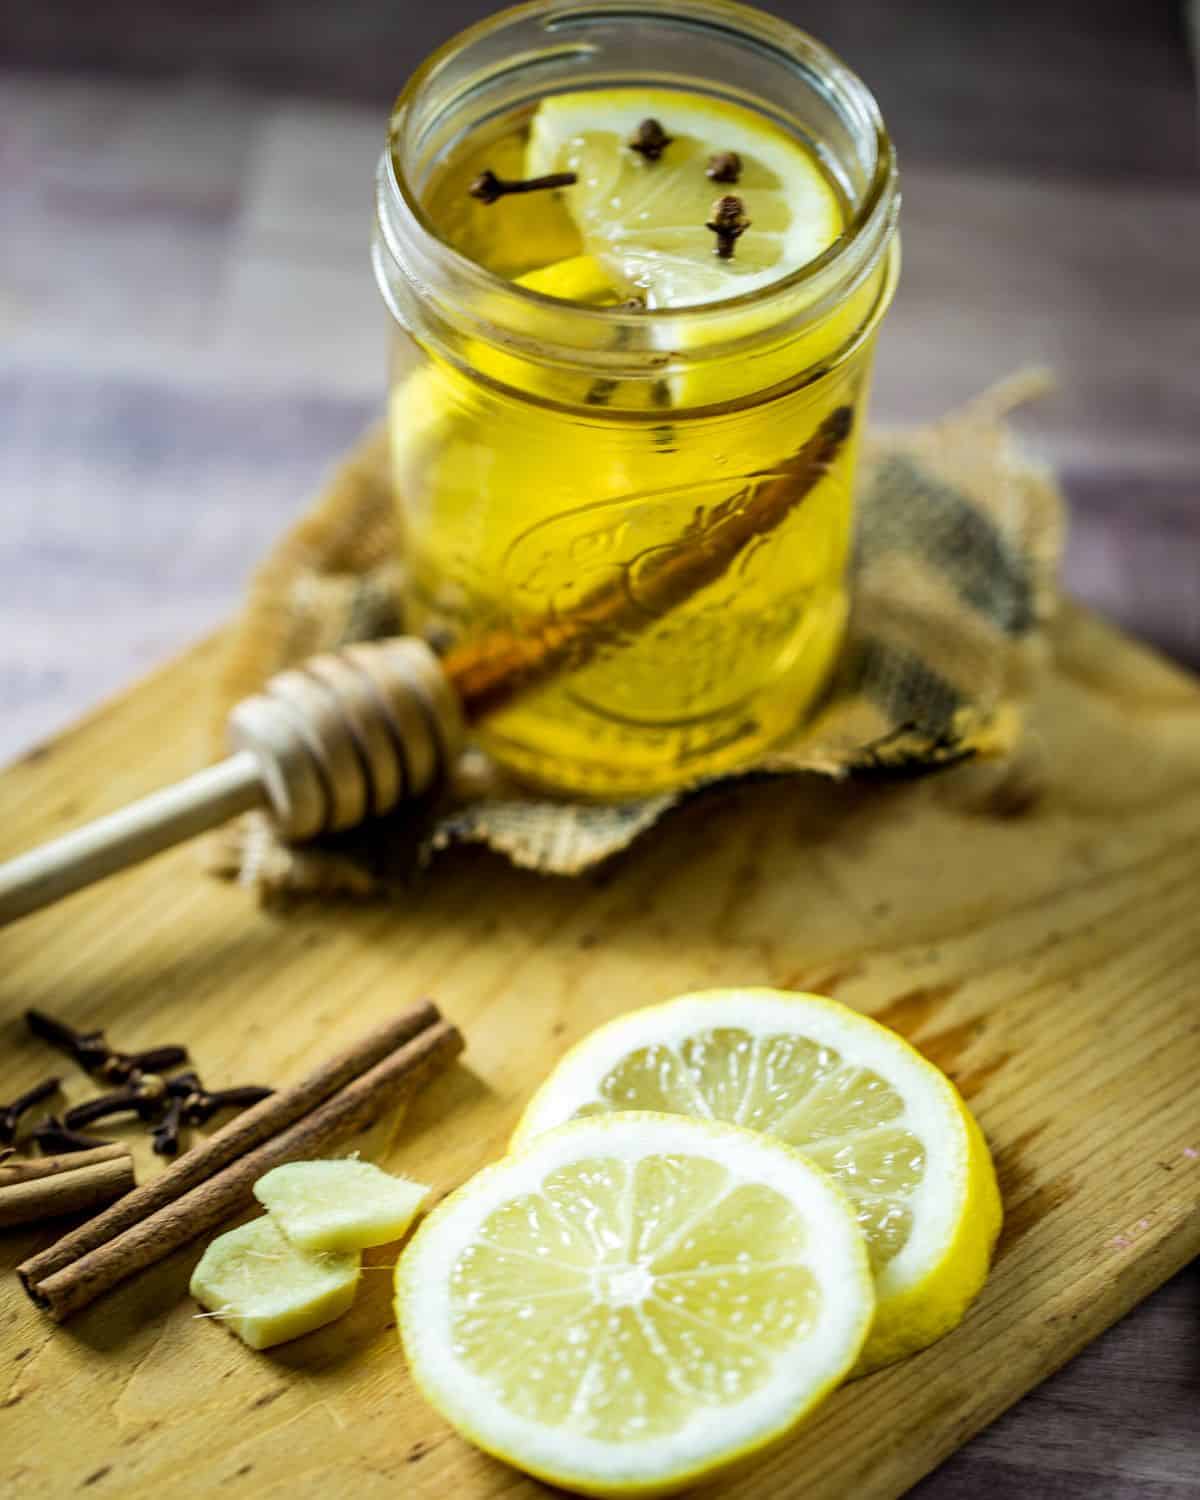 Hot toddy cloves, whiskey, lemon slices on a board.